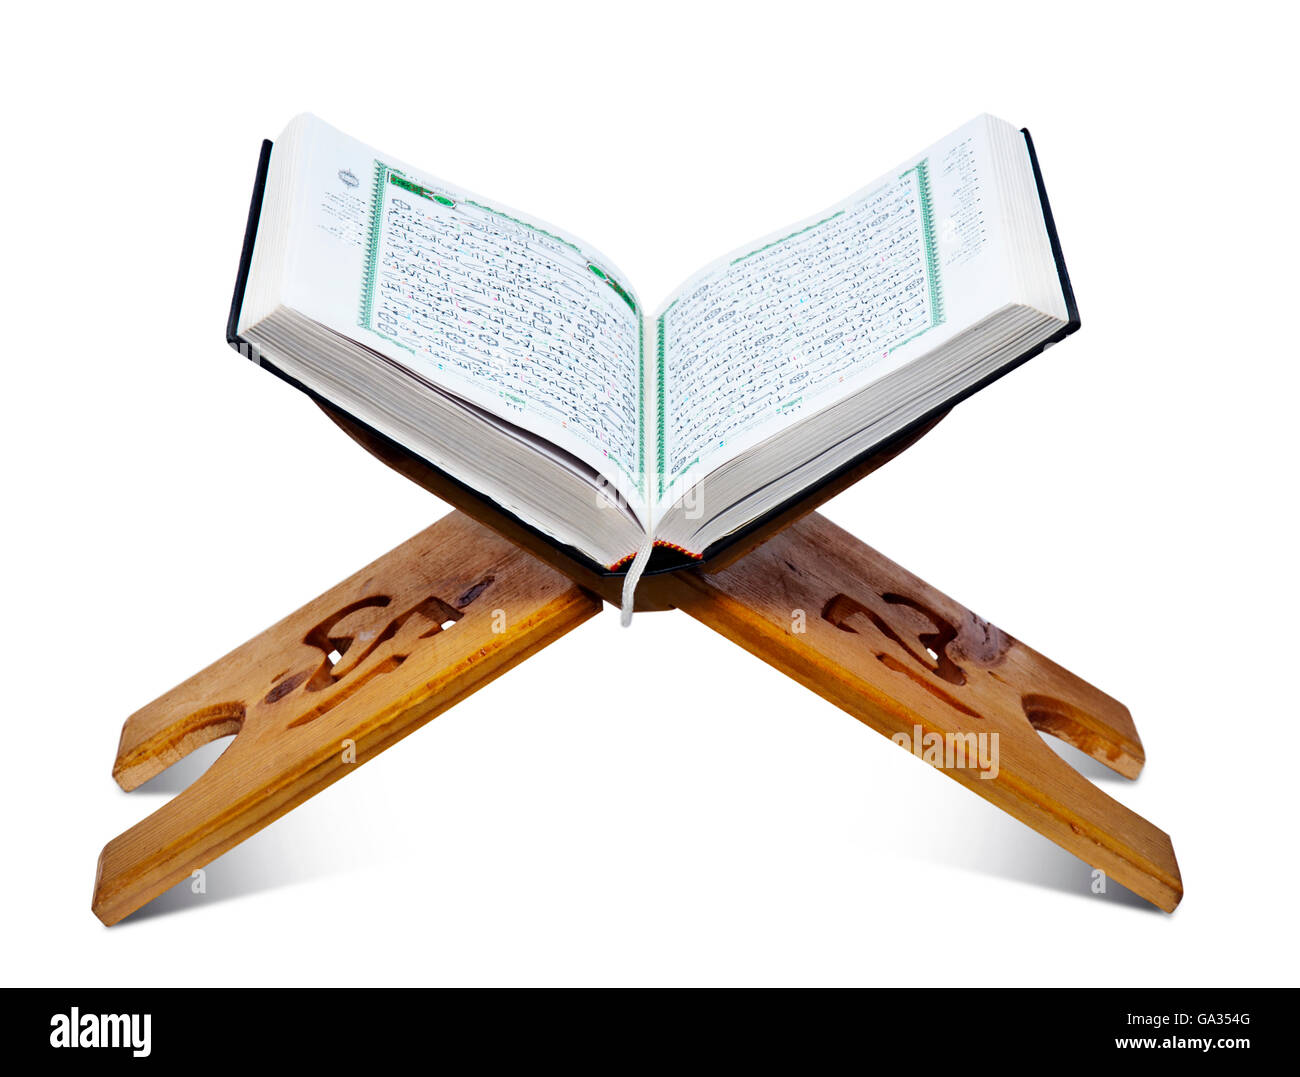 Open Wooden Quran Stand on White Stock Photo